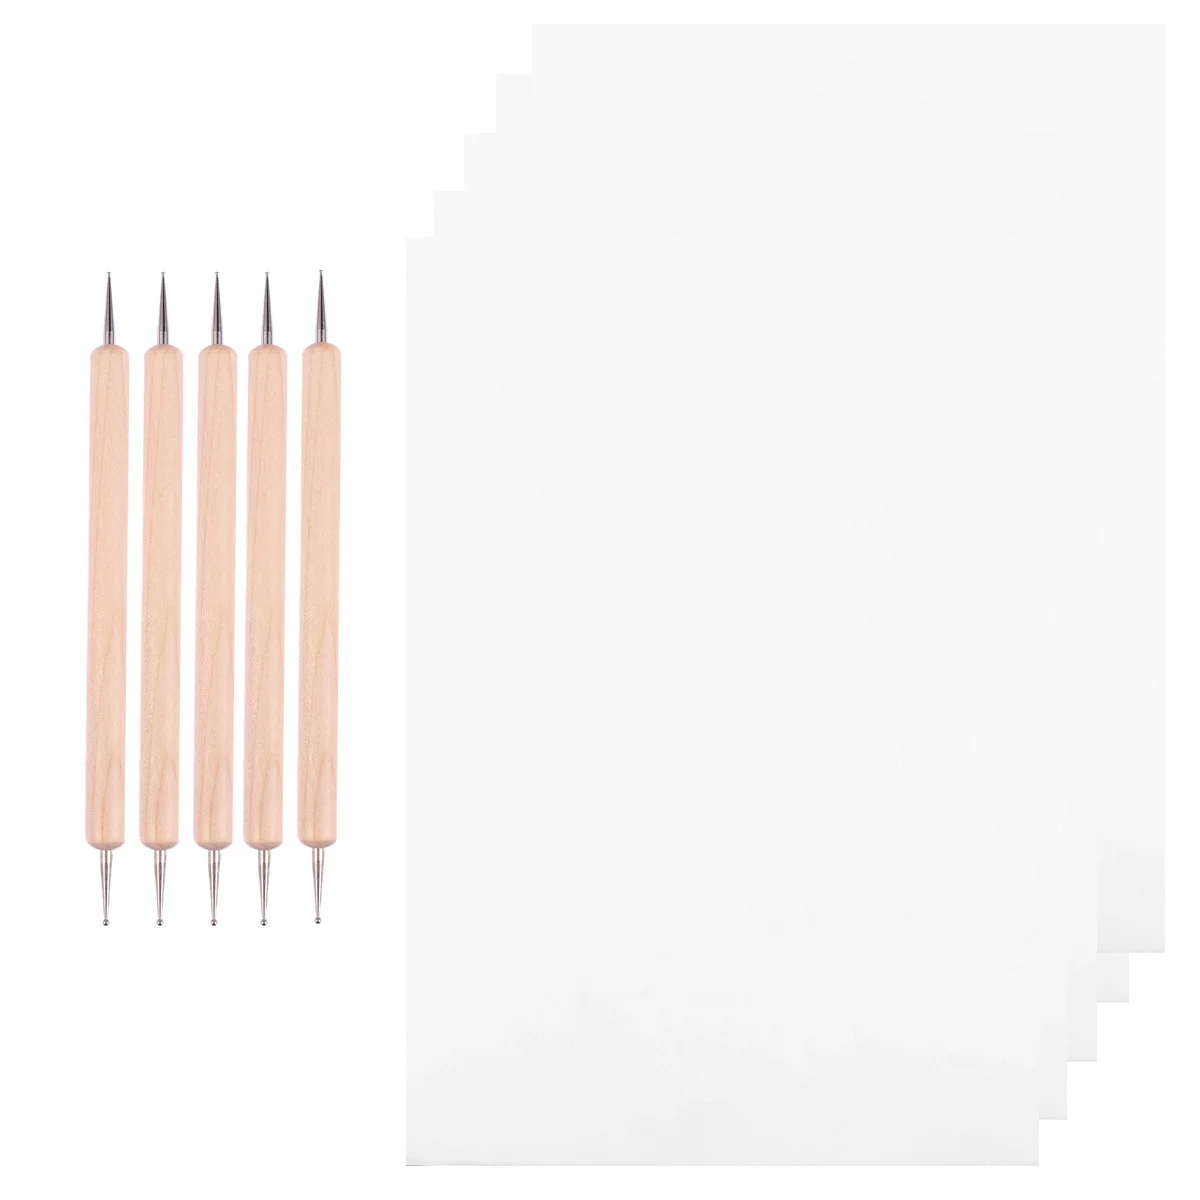 

150 Pcs Graphite Transfer Paper Tracing Stylus Dotting Tool Embroidery Tools Wood Carbon Carving